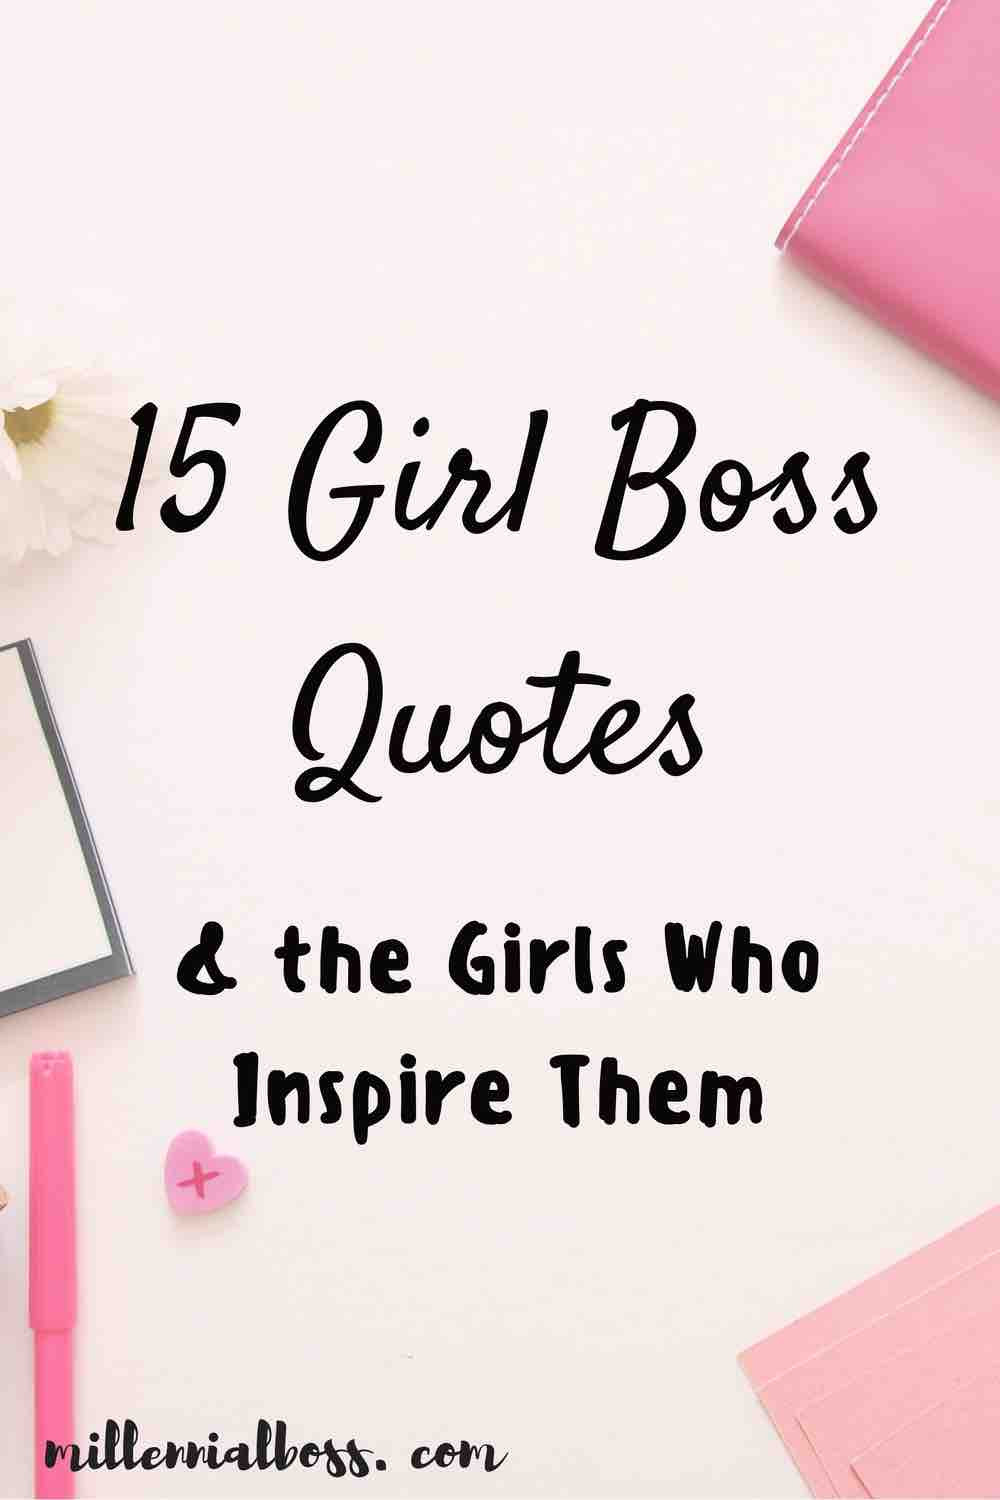 Motivational Quotes For Girlfriend
 15 Girl Boss Quotes & the Girls Who Inspire Them